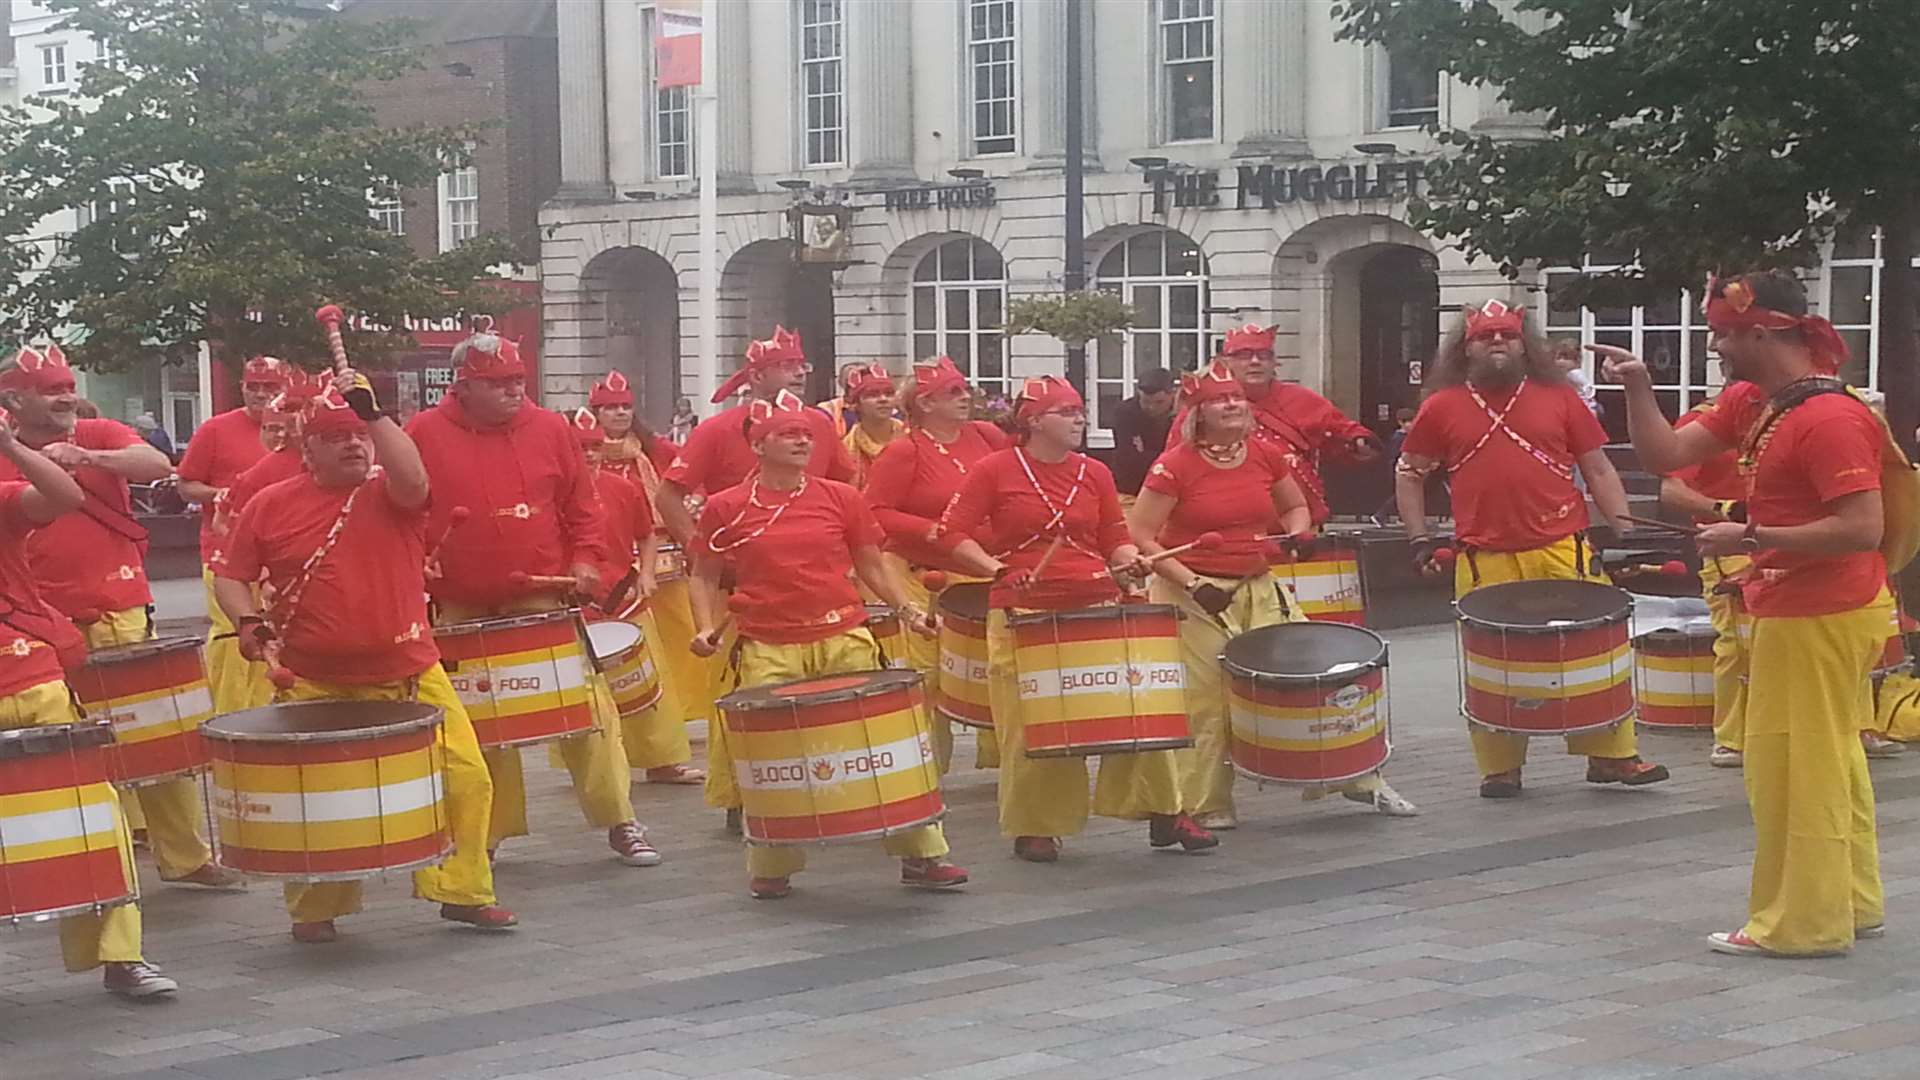 Bloco Fogo in action in Jubilee Square